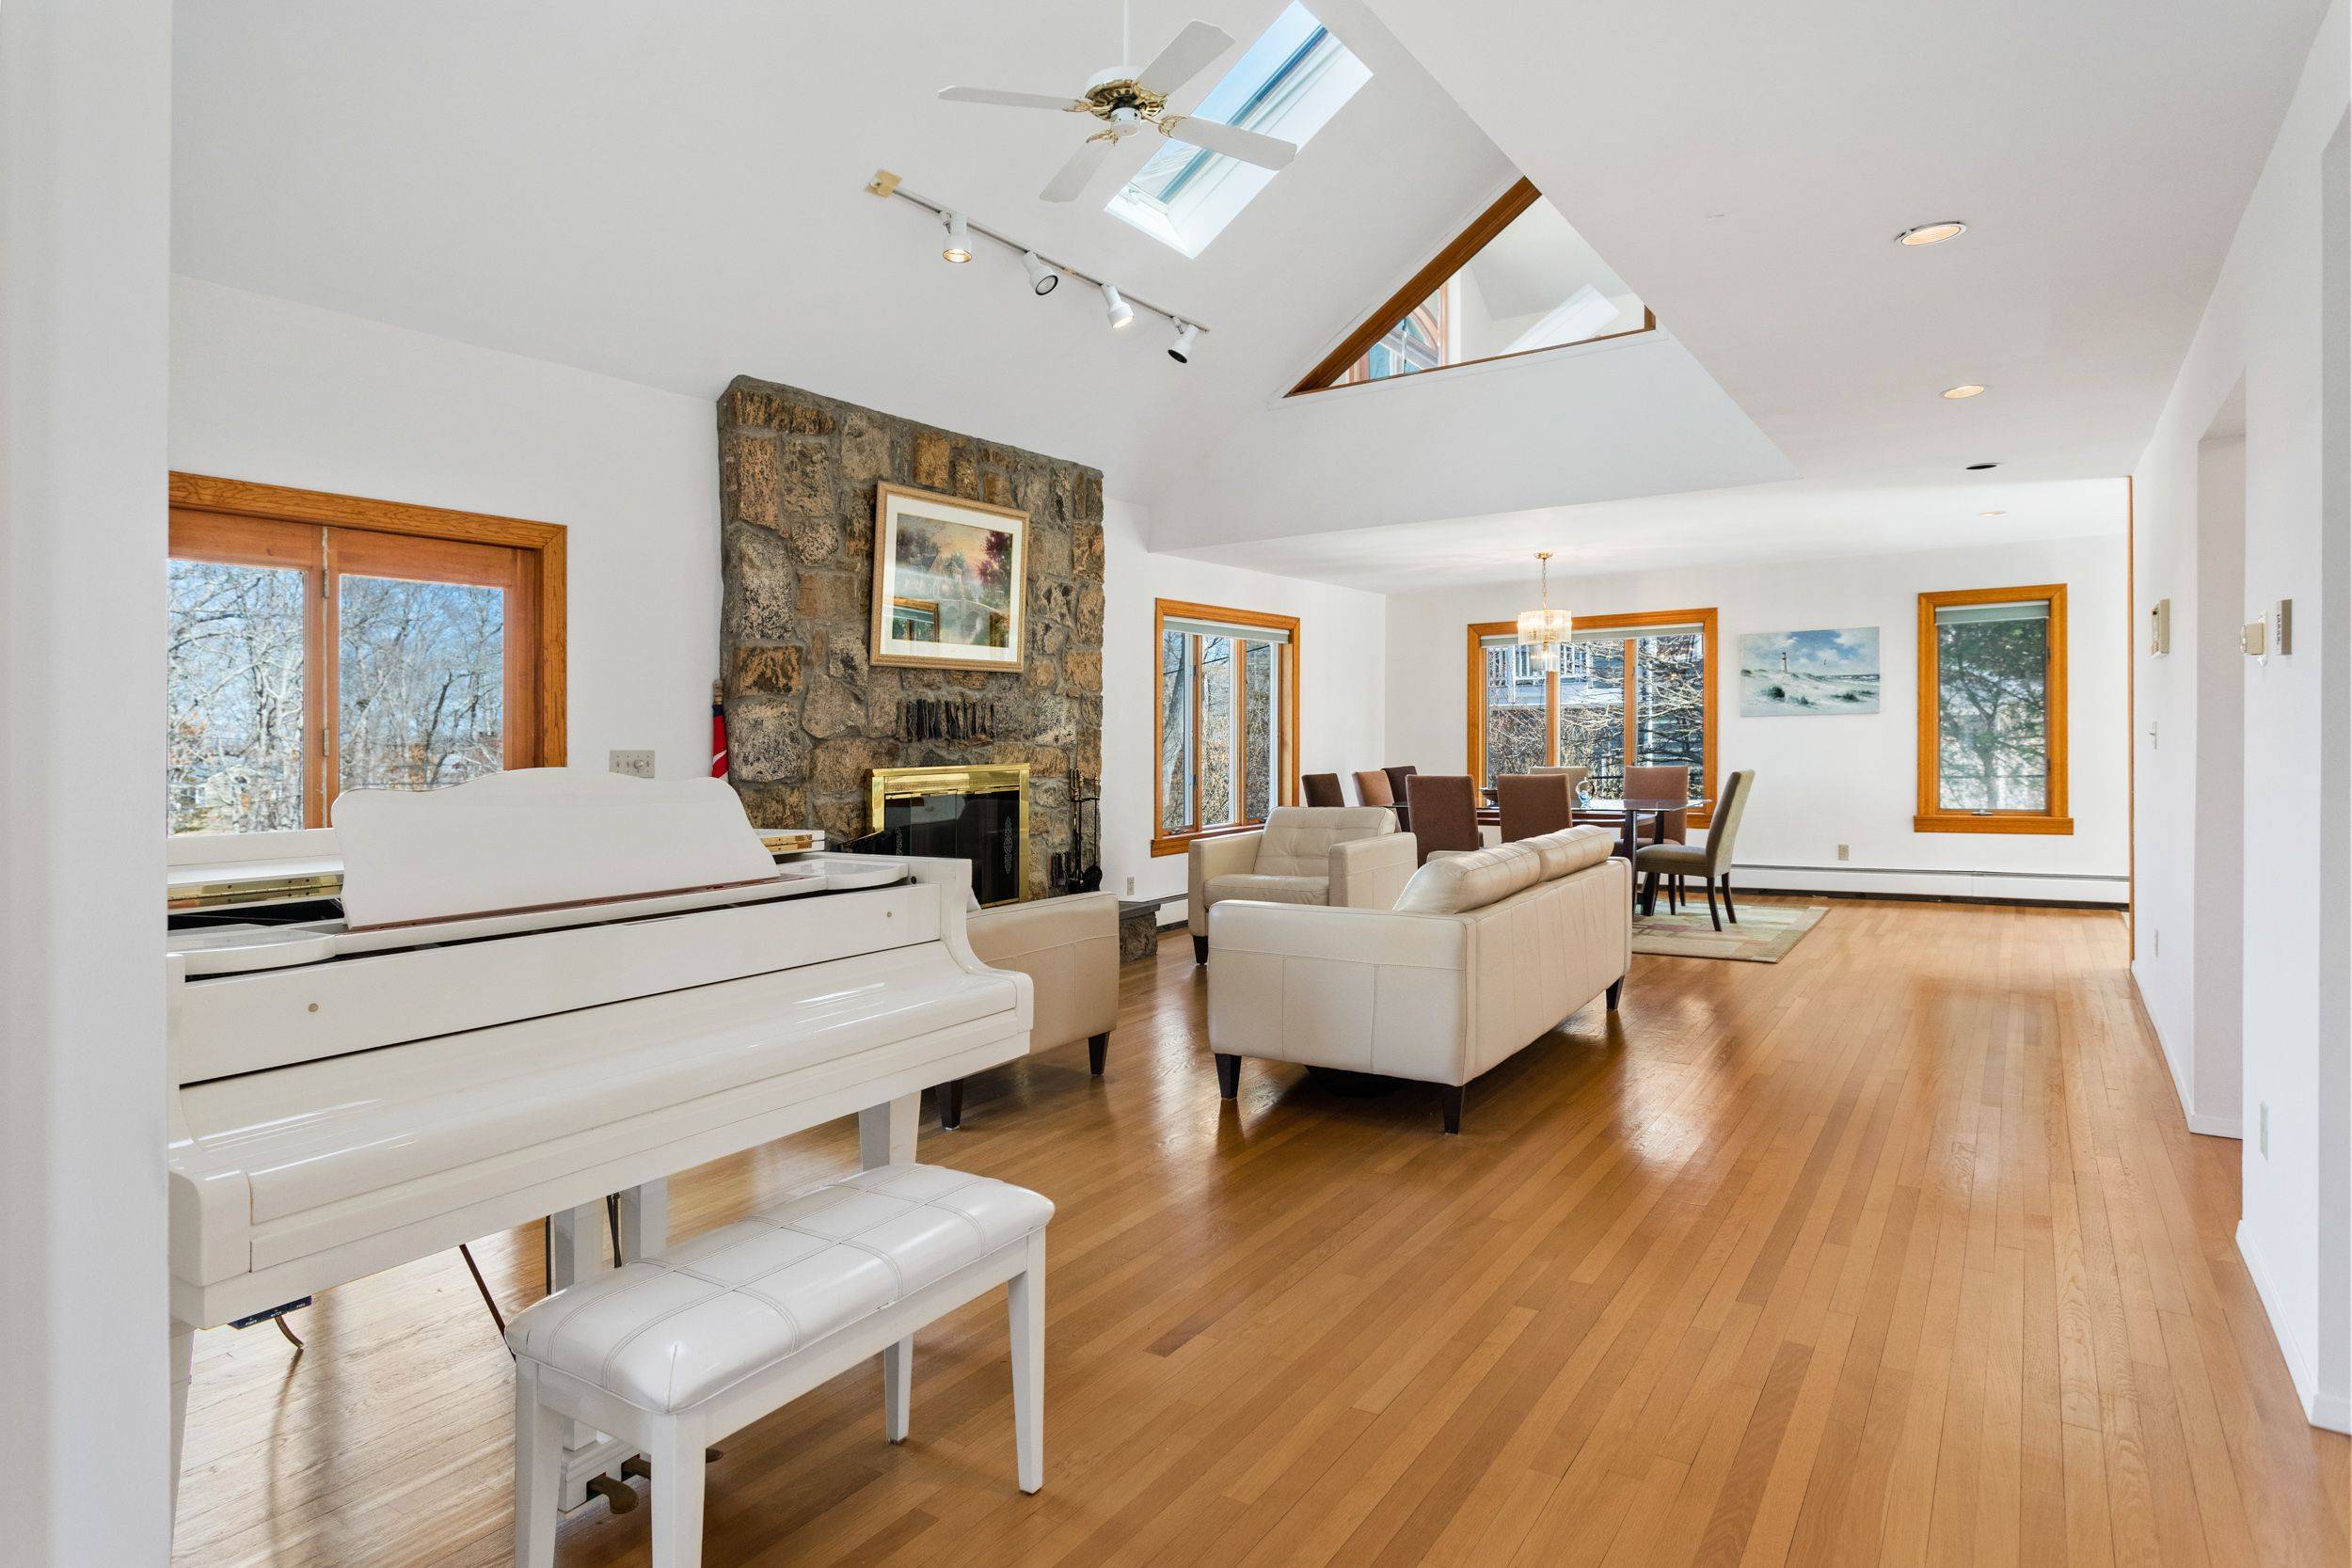 Stunning Property Located in the Heart of Sag Harbor!